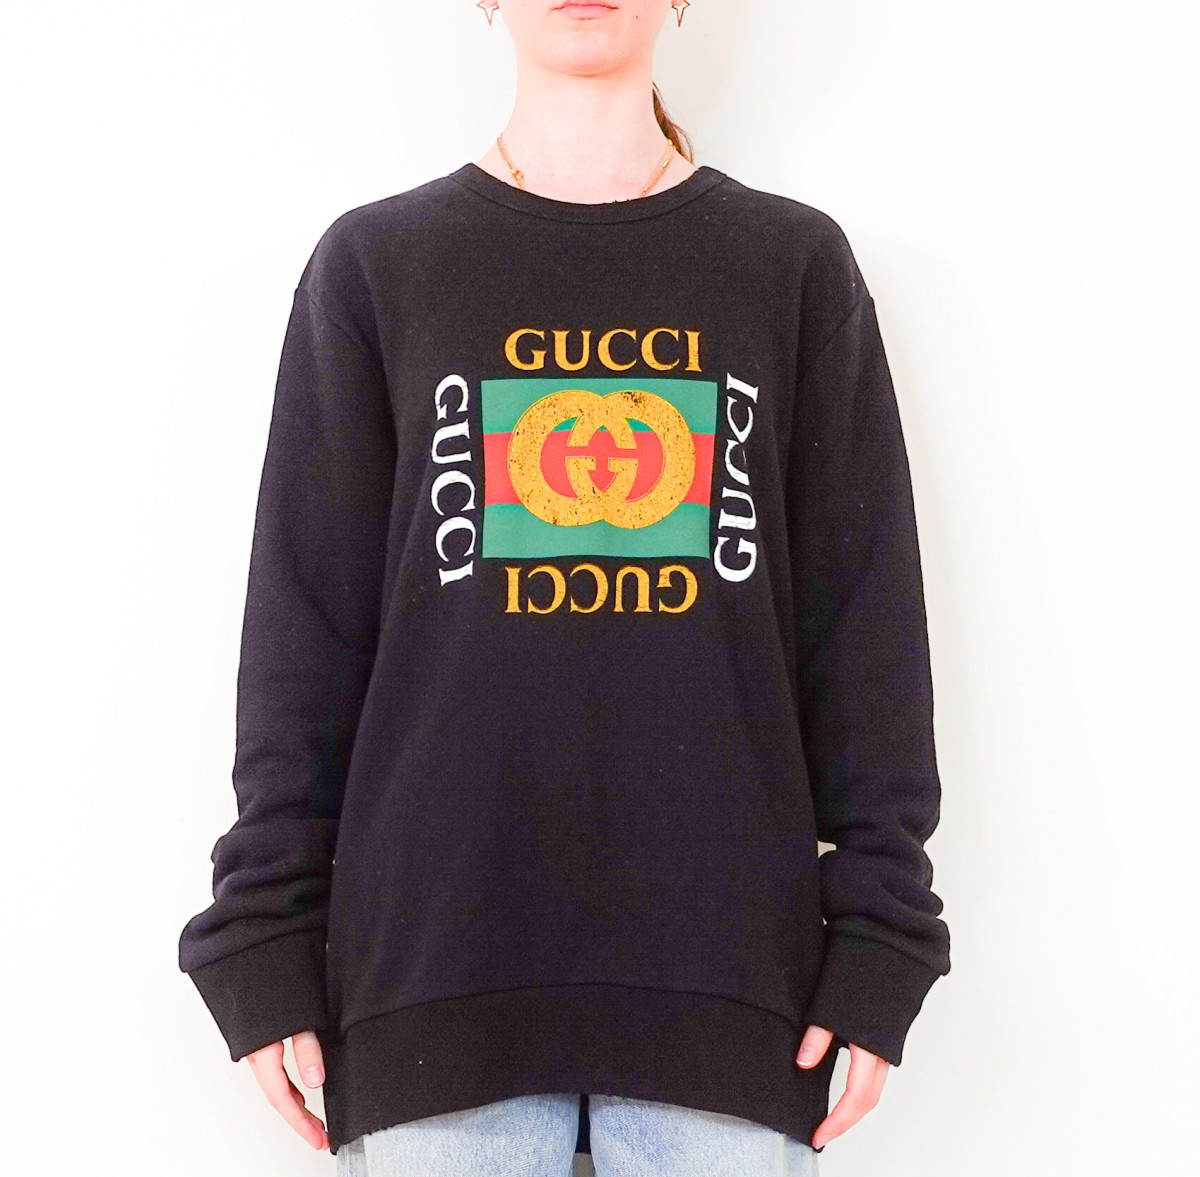 RELOVED AGAIN | Gucci black sweatshirt with logo XL RRP £760